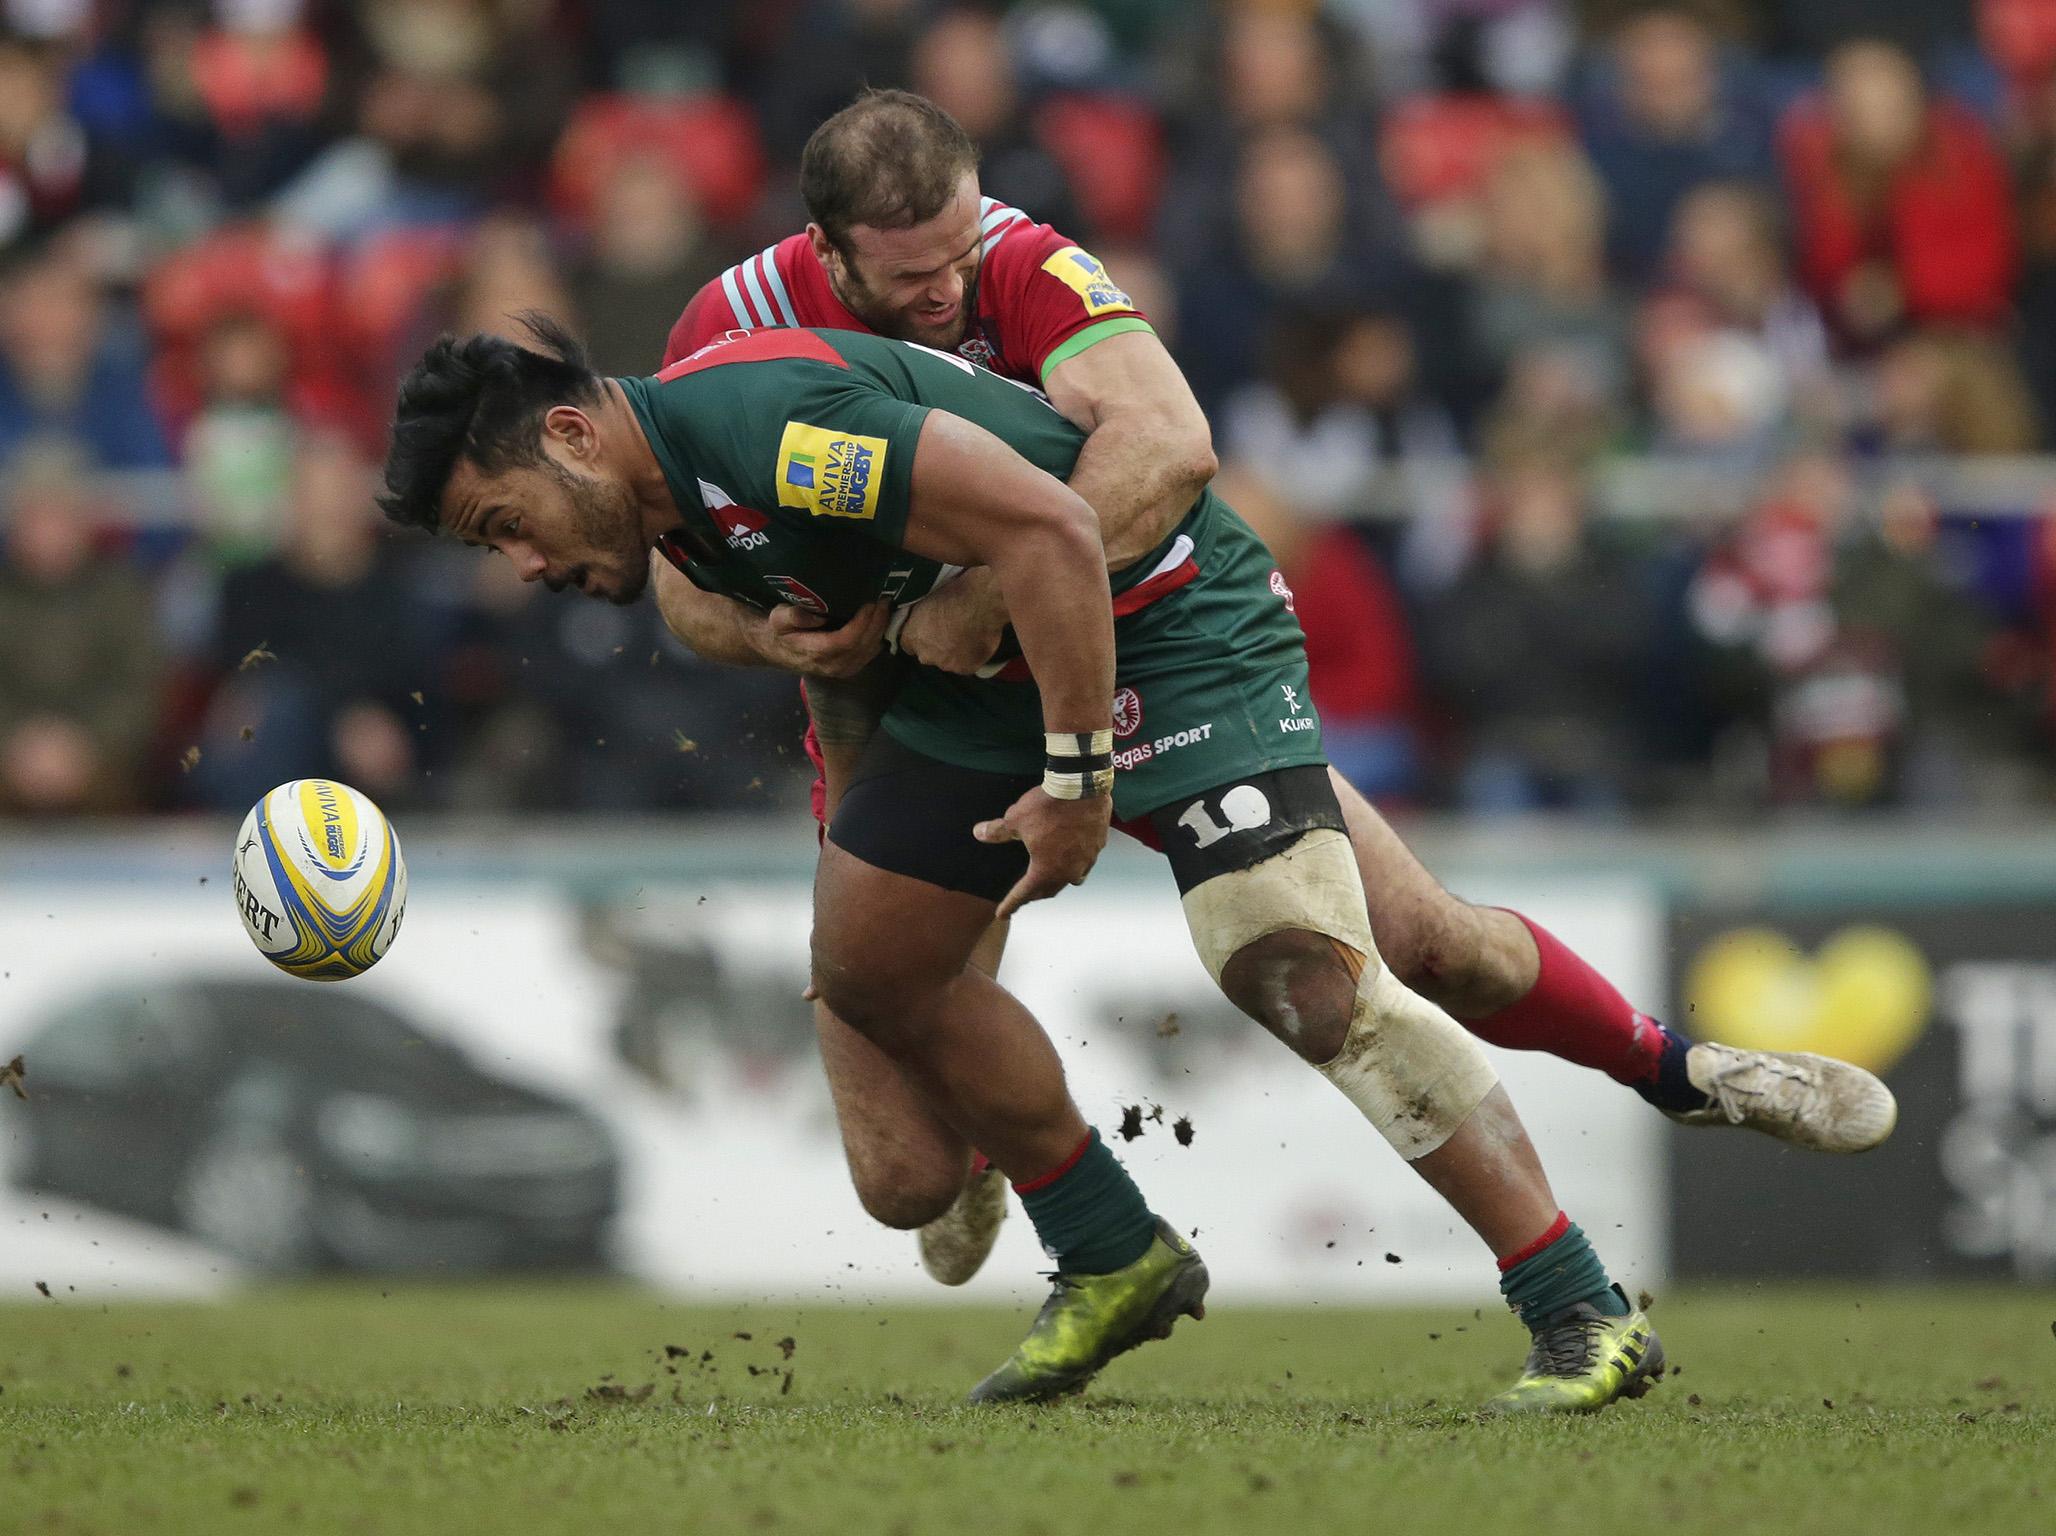 Manu Tuilagi is crunched by opposite centre Jamie Roberts